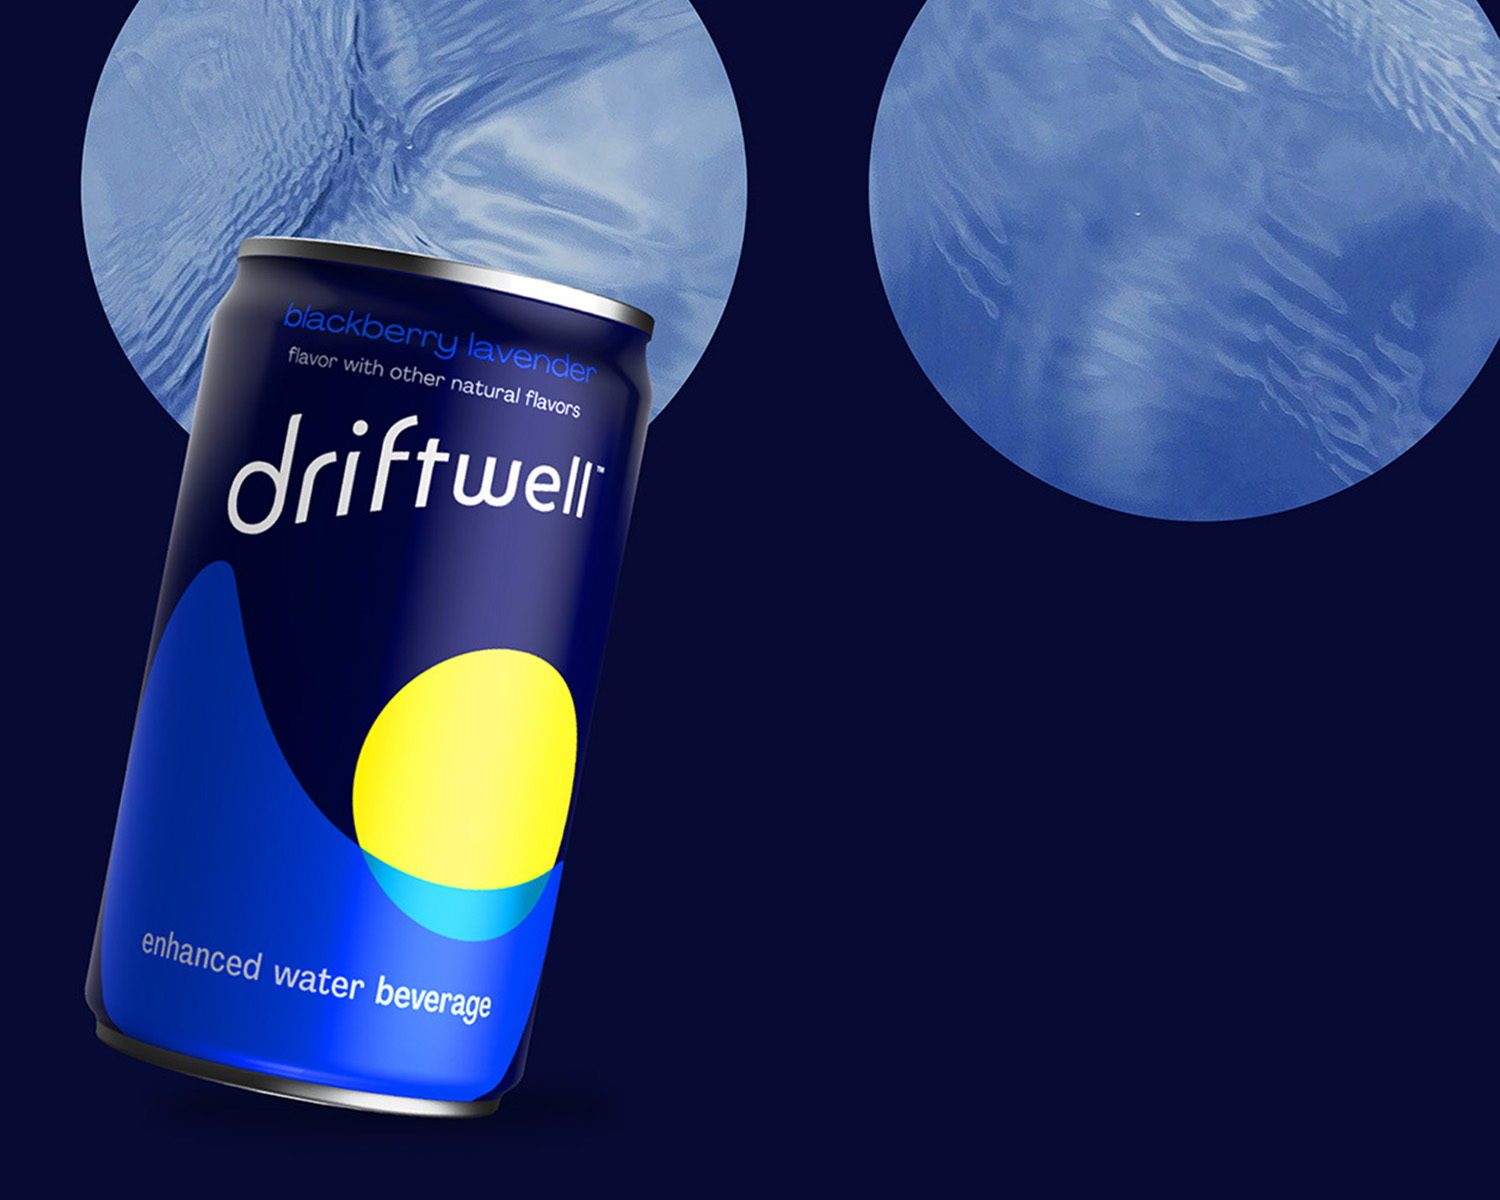 PHOTO: PepsiCo will debut Driftwell, its new enhanced water beverage, in 7.5-ounce mini cans this December.